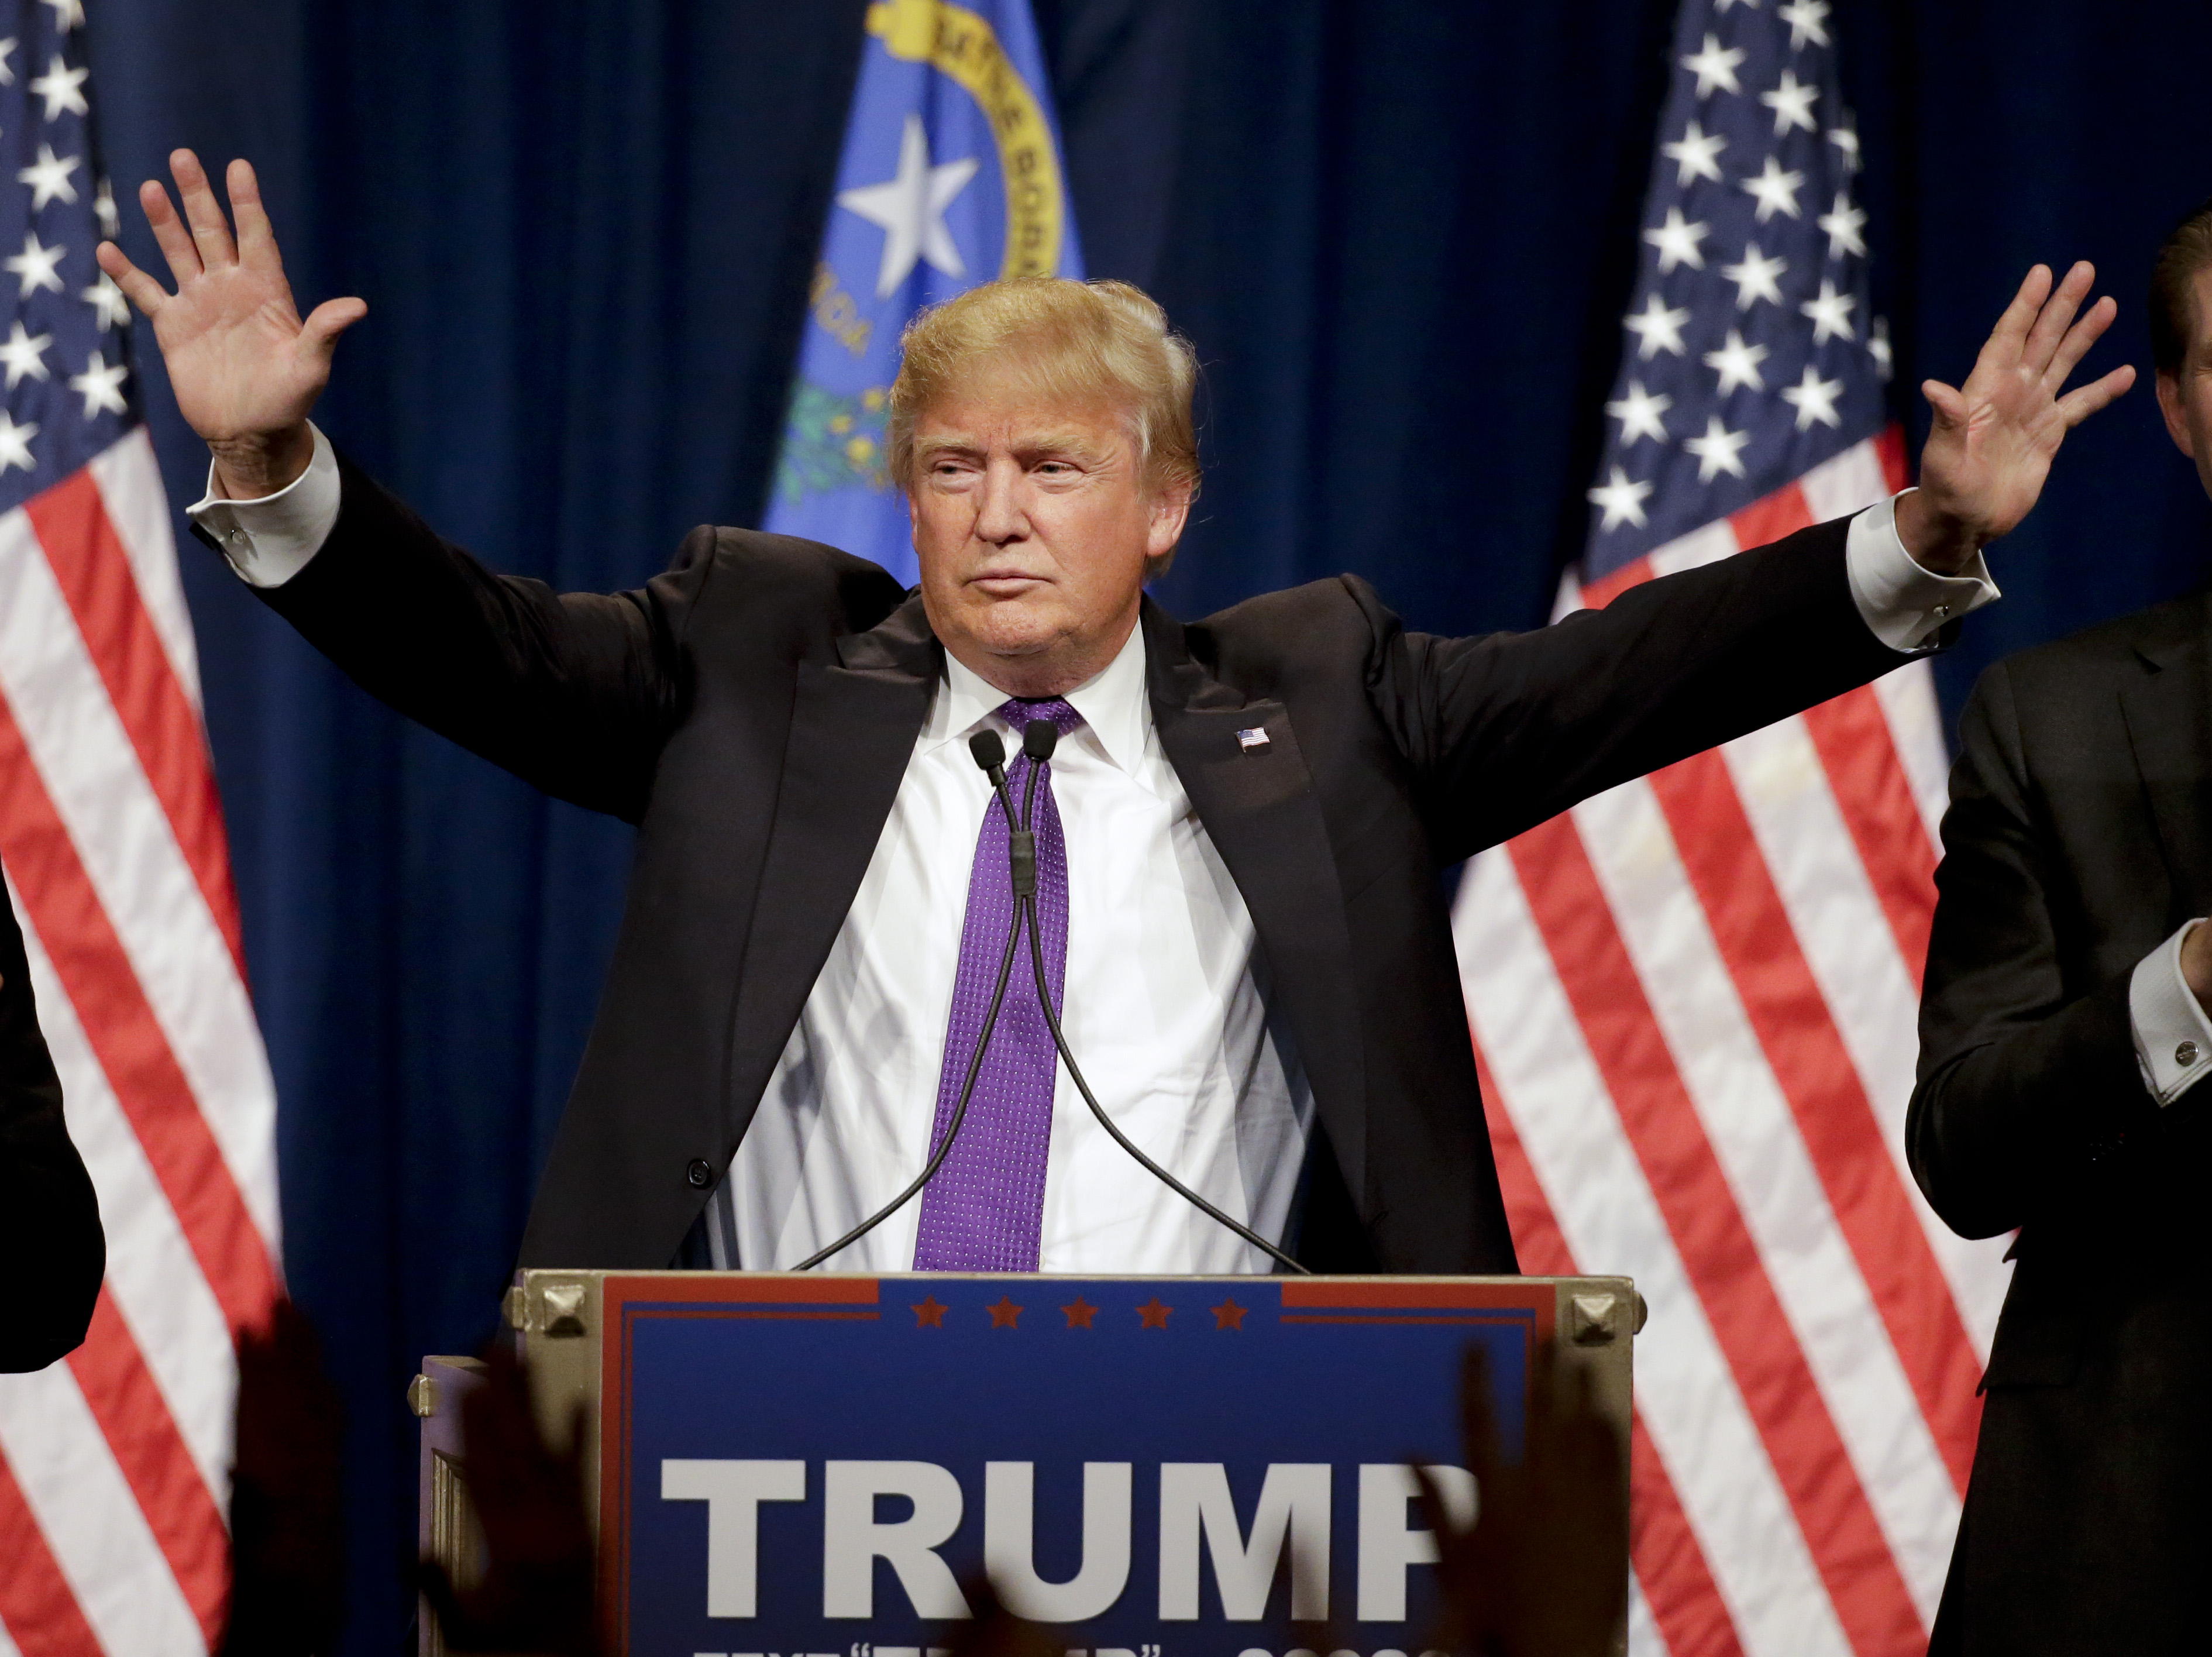 Republican presidential candidate Donald Trump speaks during a caucus night rally Tuesday, Feb. 23, 2016, in Las Vegas. (AP Photo/Jae C. Hong)